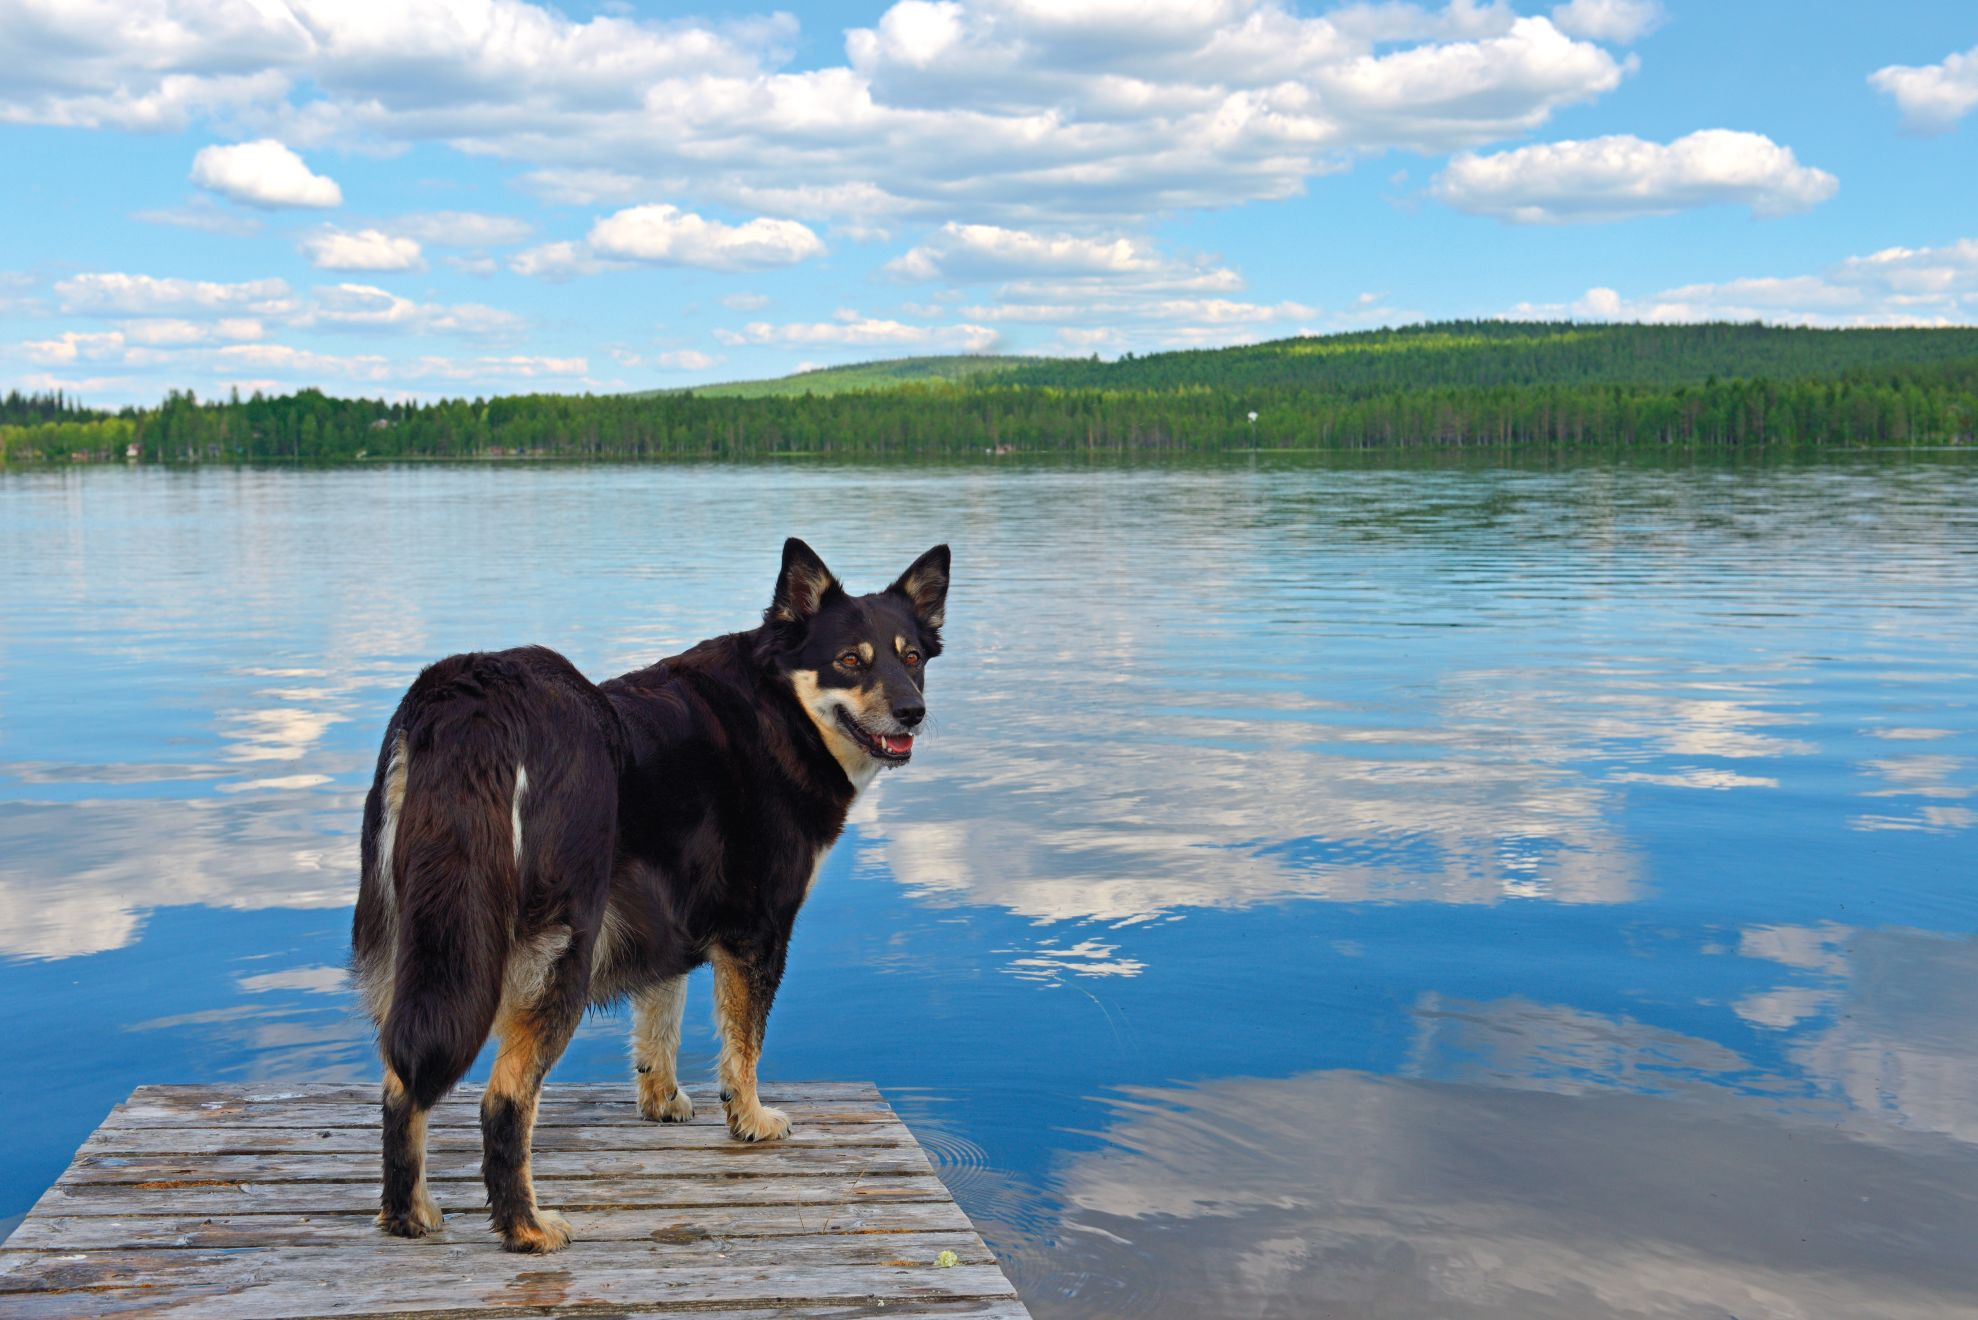 Lapponian Herder standing on jetty over water